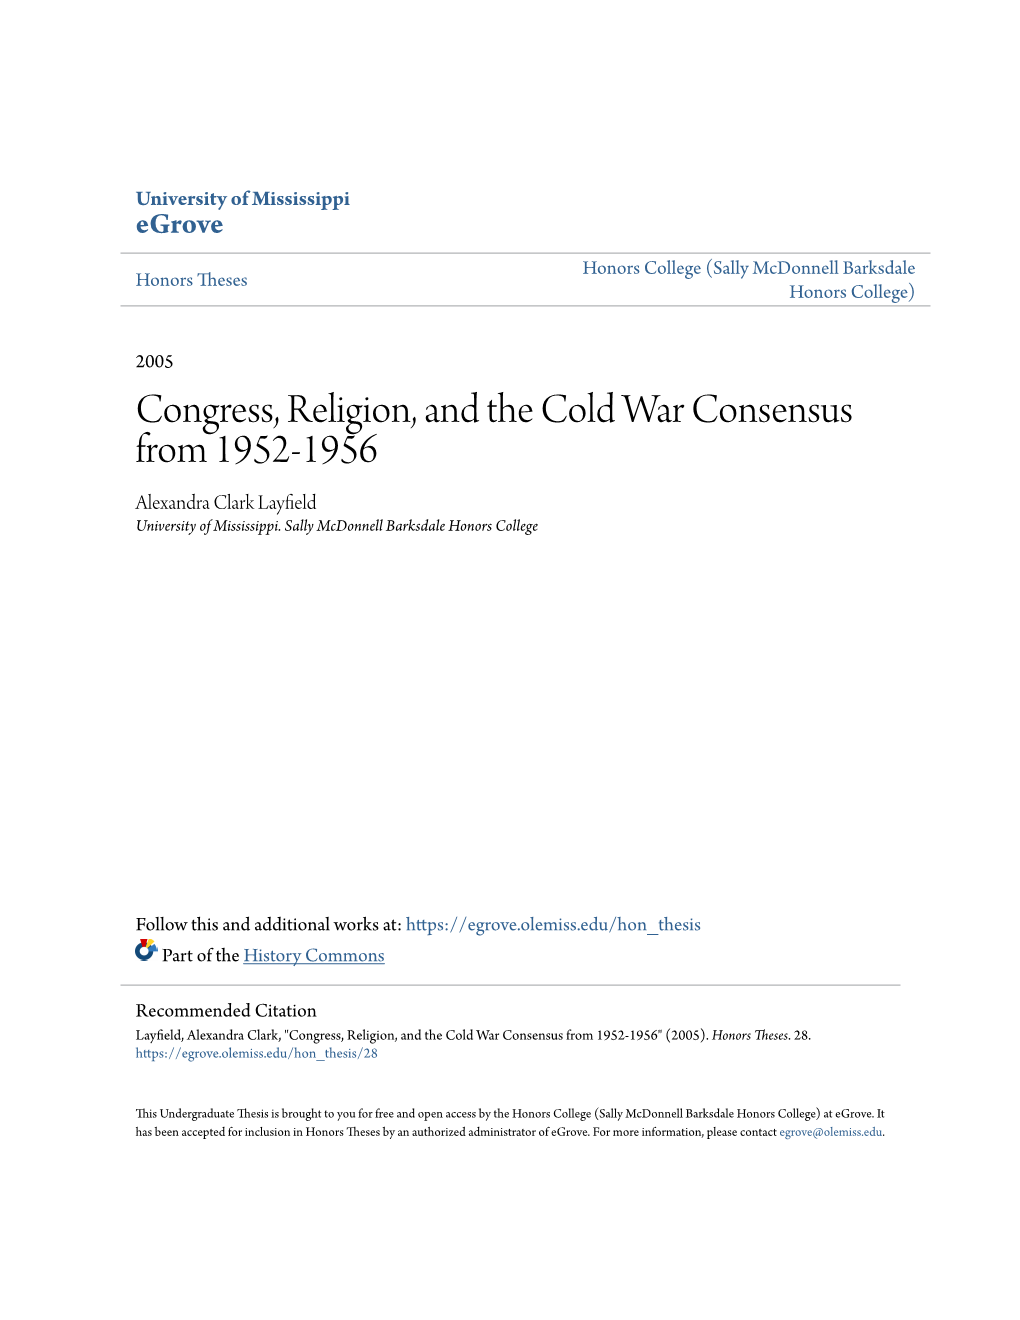 Congress, Religion, and the Cold War Consensus from 1952-1956 Alexandra Clark Layfield University of Mississippi